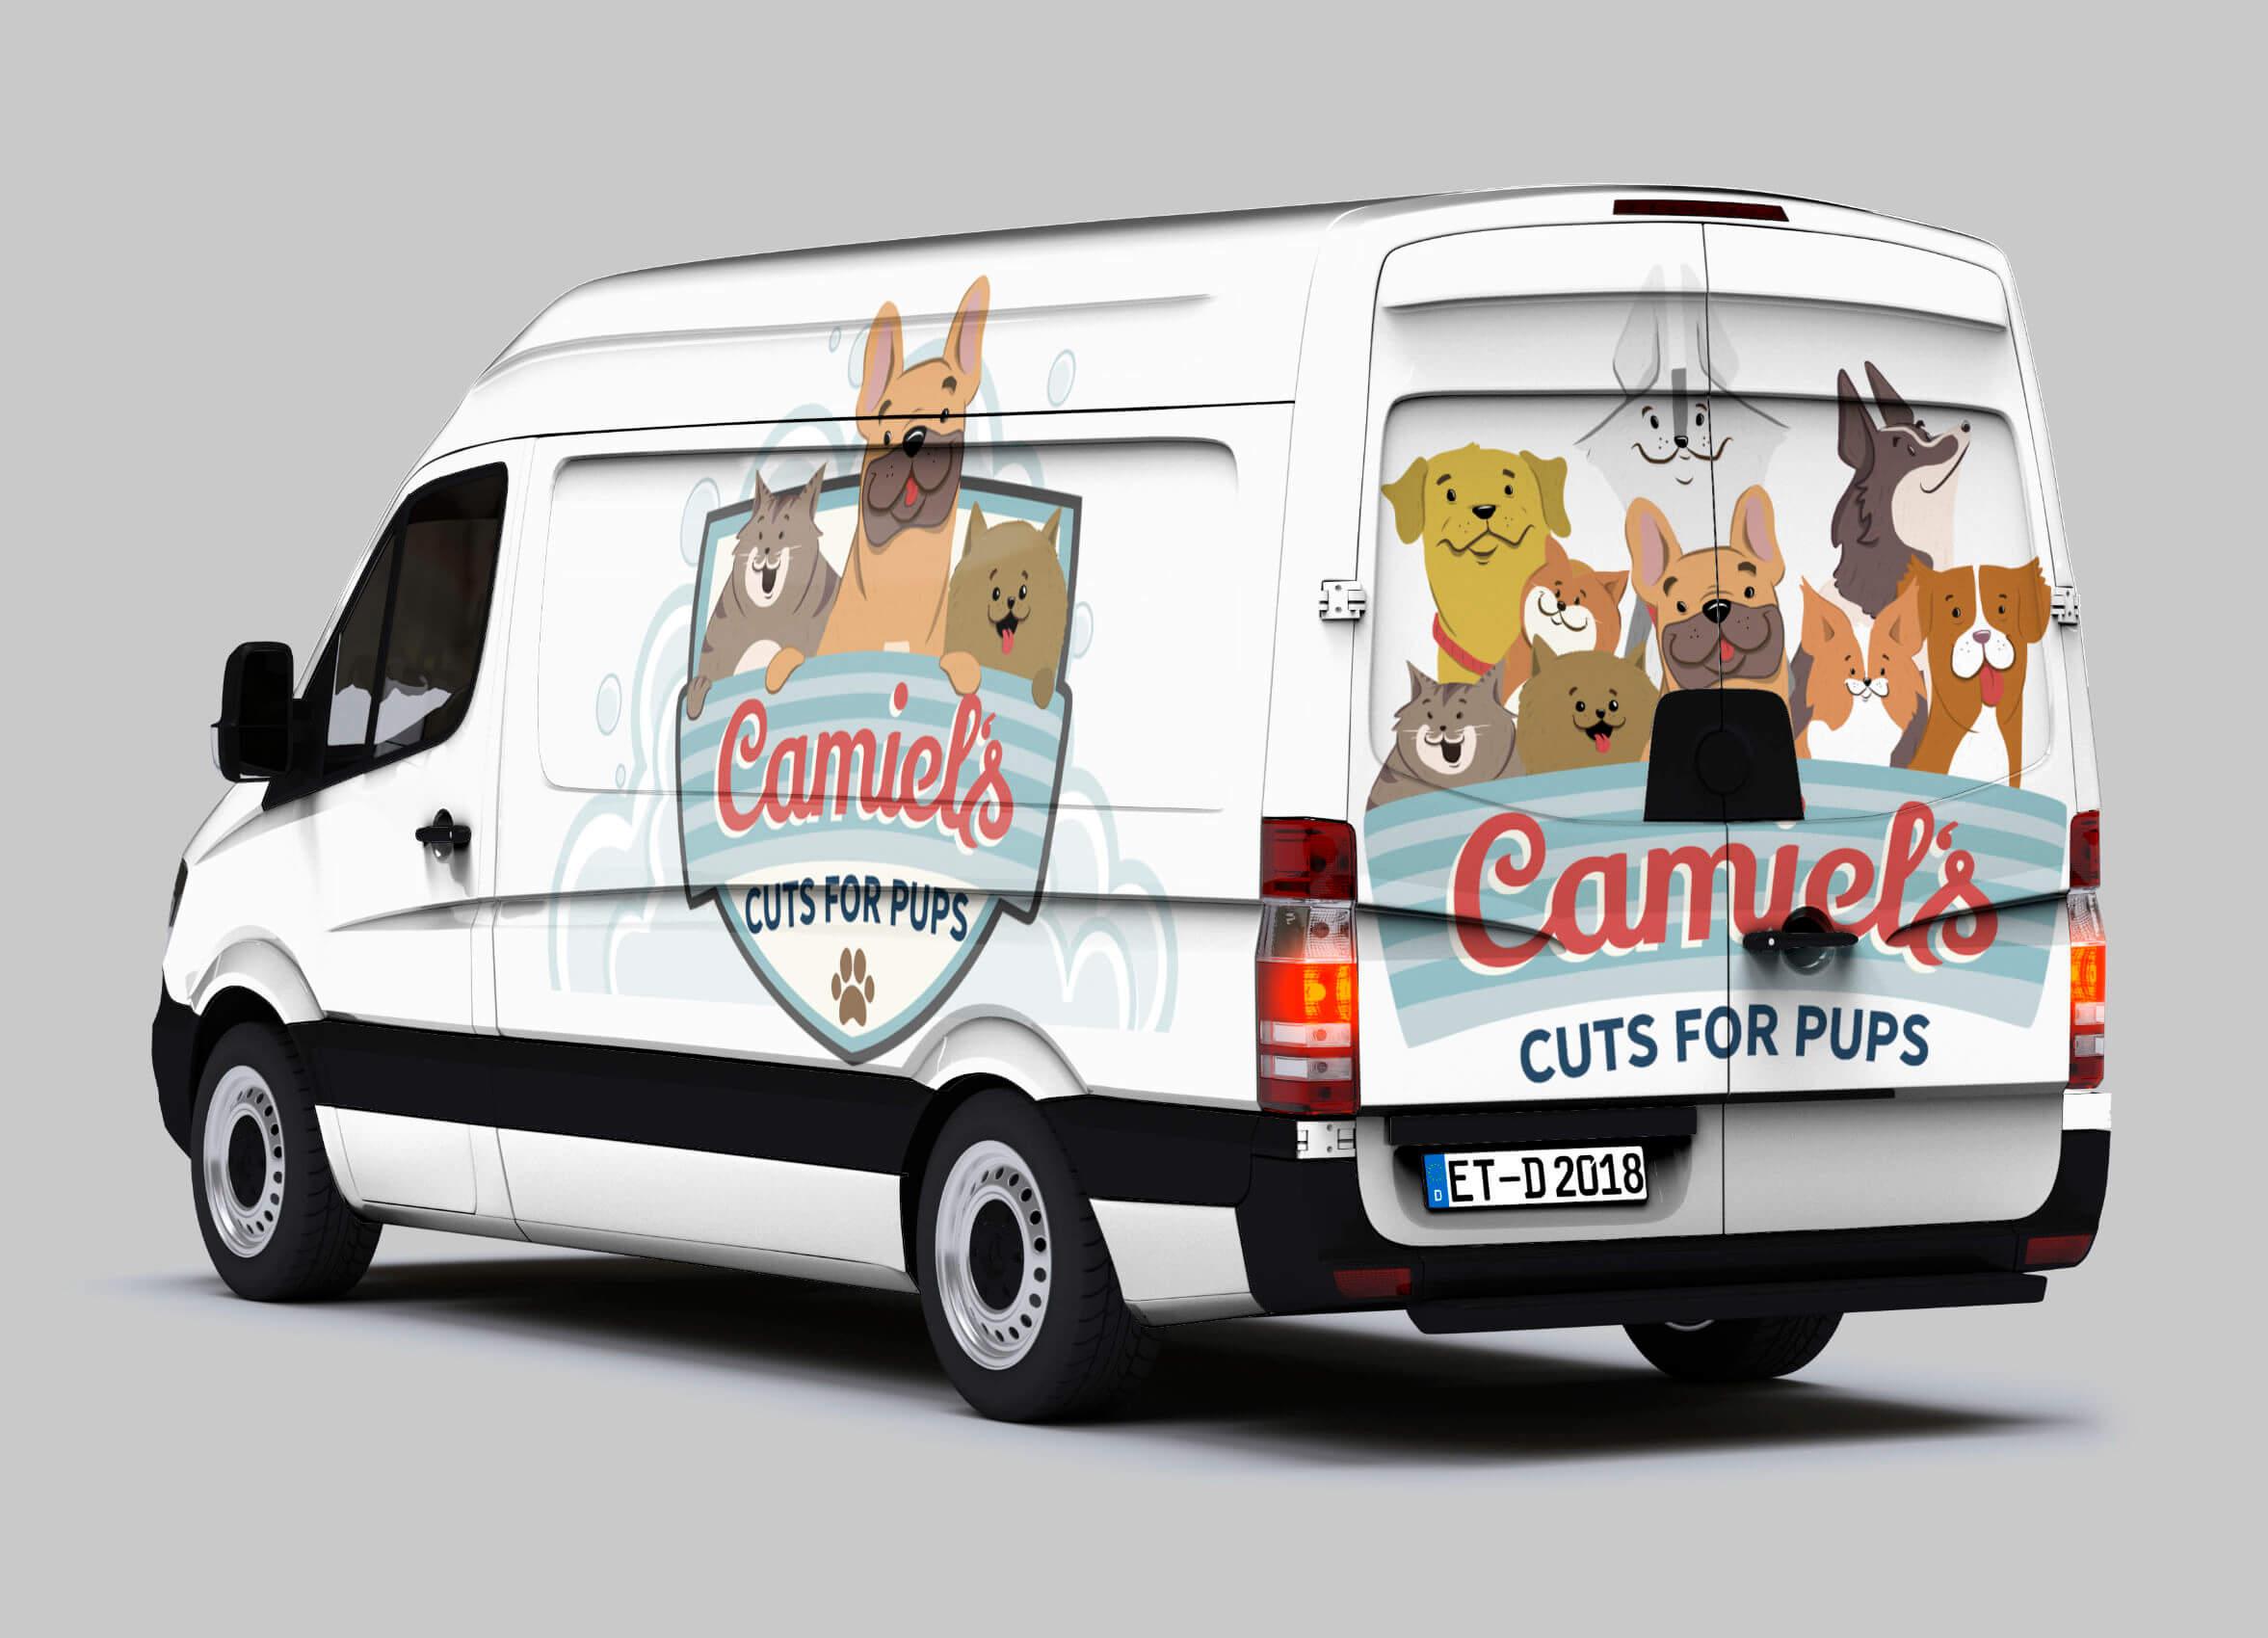 A sprinter van with dog illustrations on it.